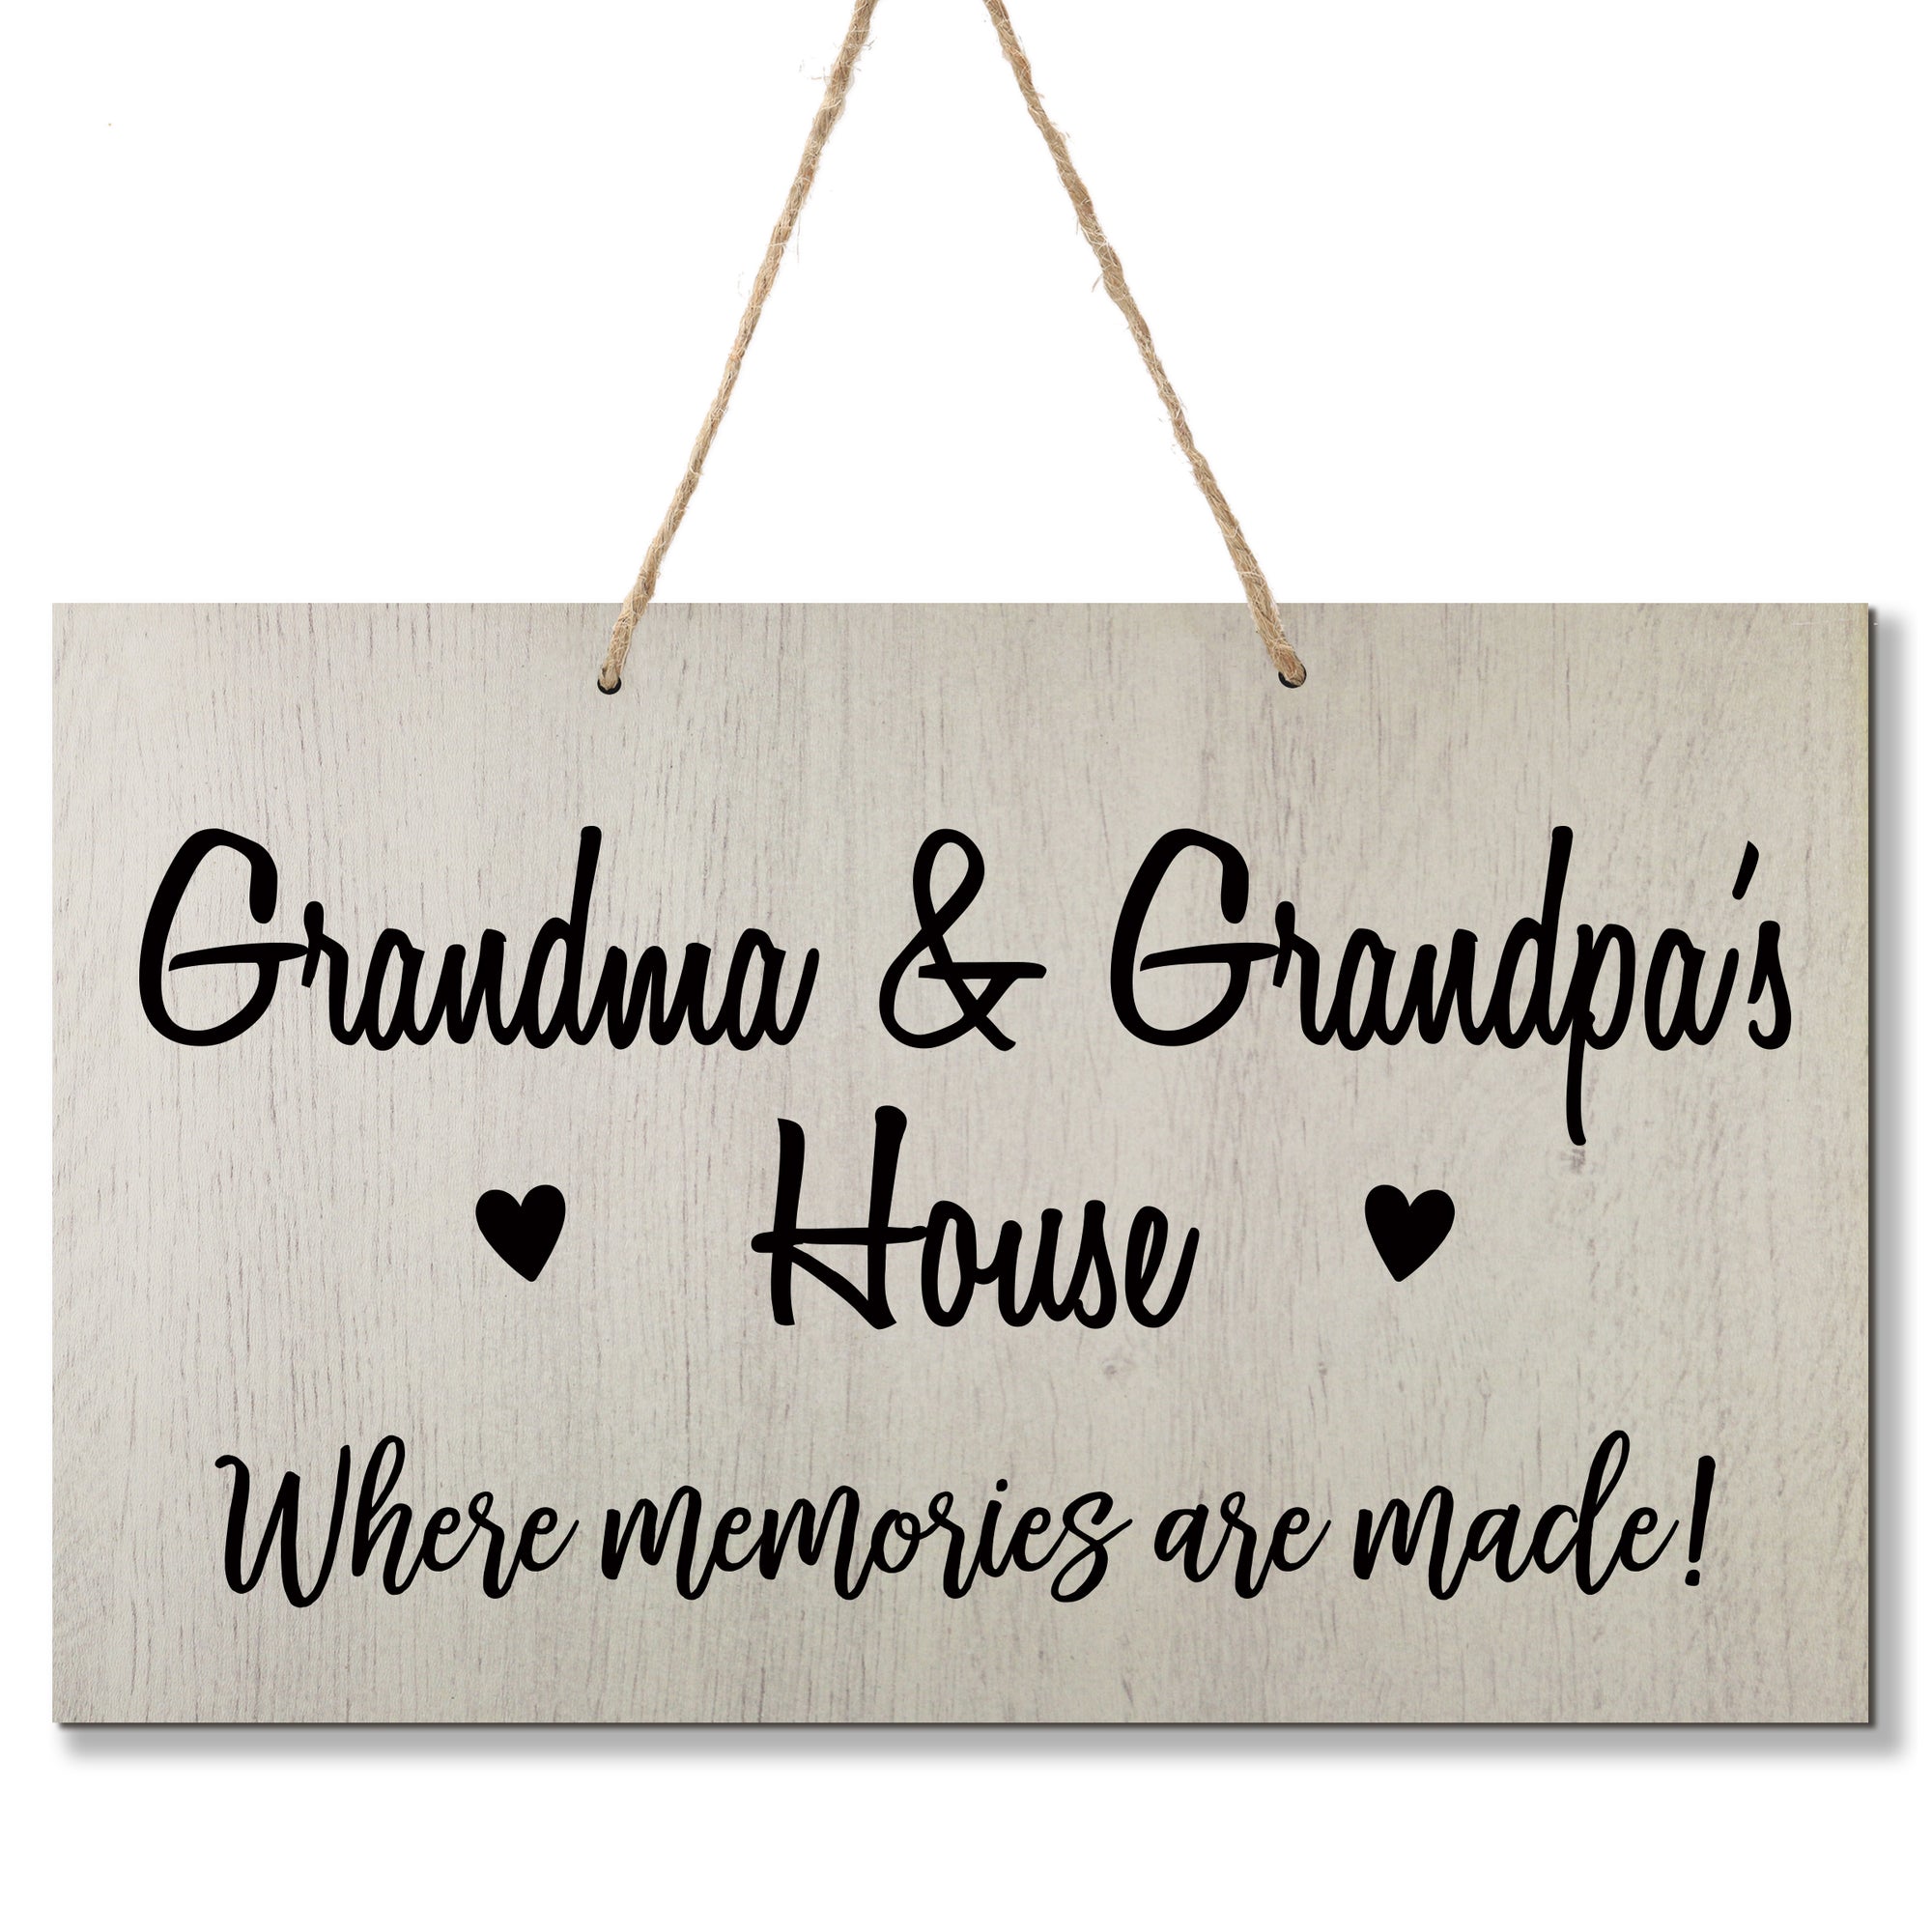 Personalized Grandparent Wall Hanging Sign Gift - Memories Are Made Grandma and Grandpa White